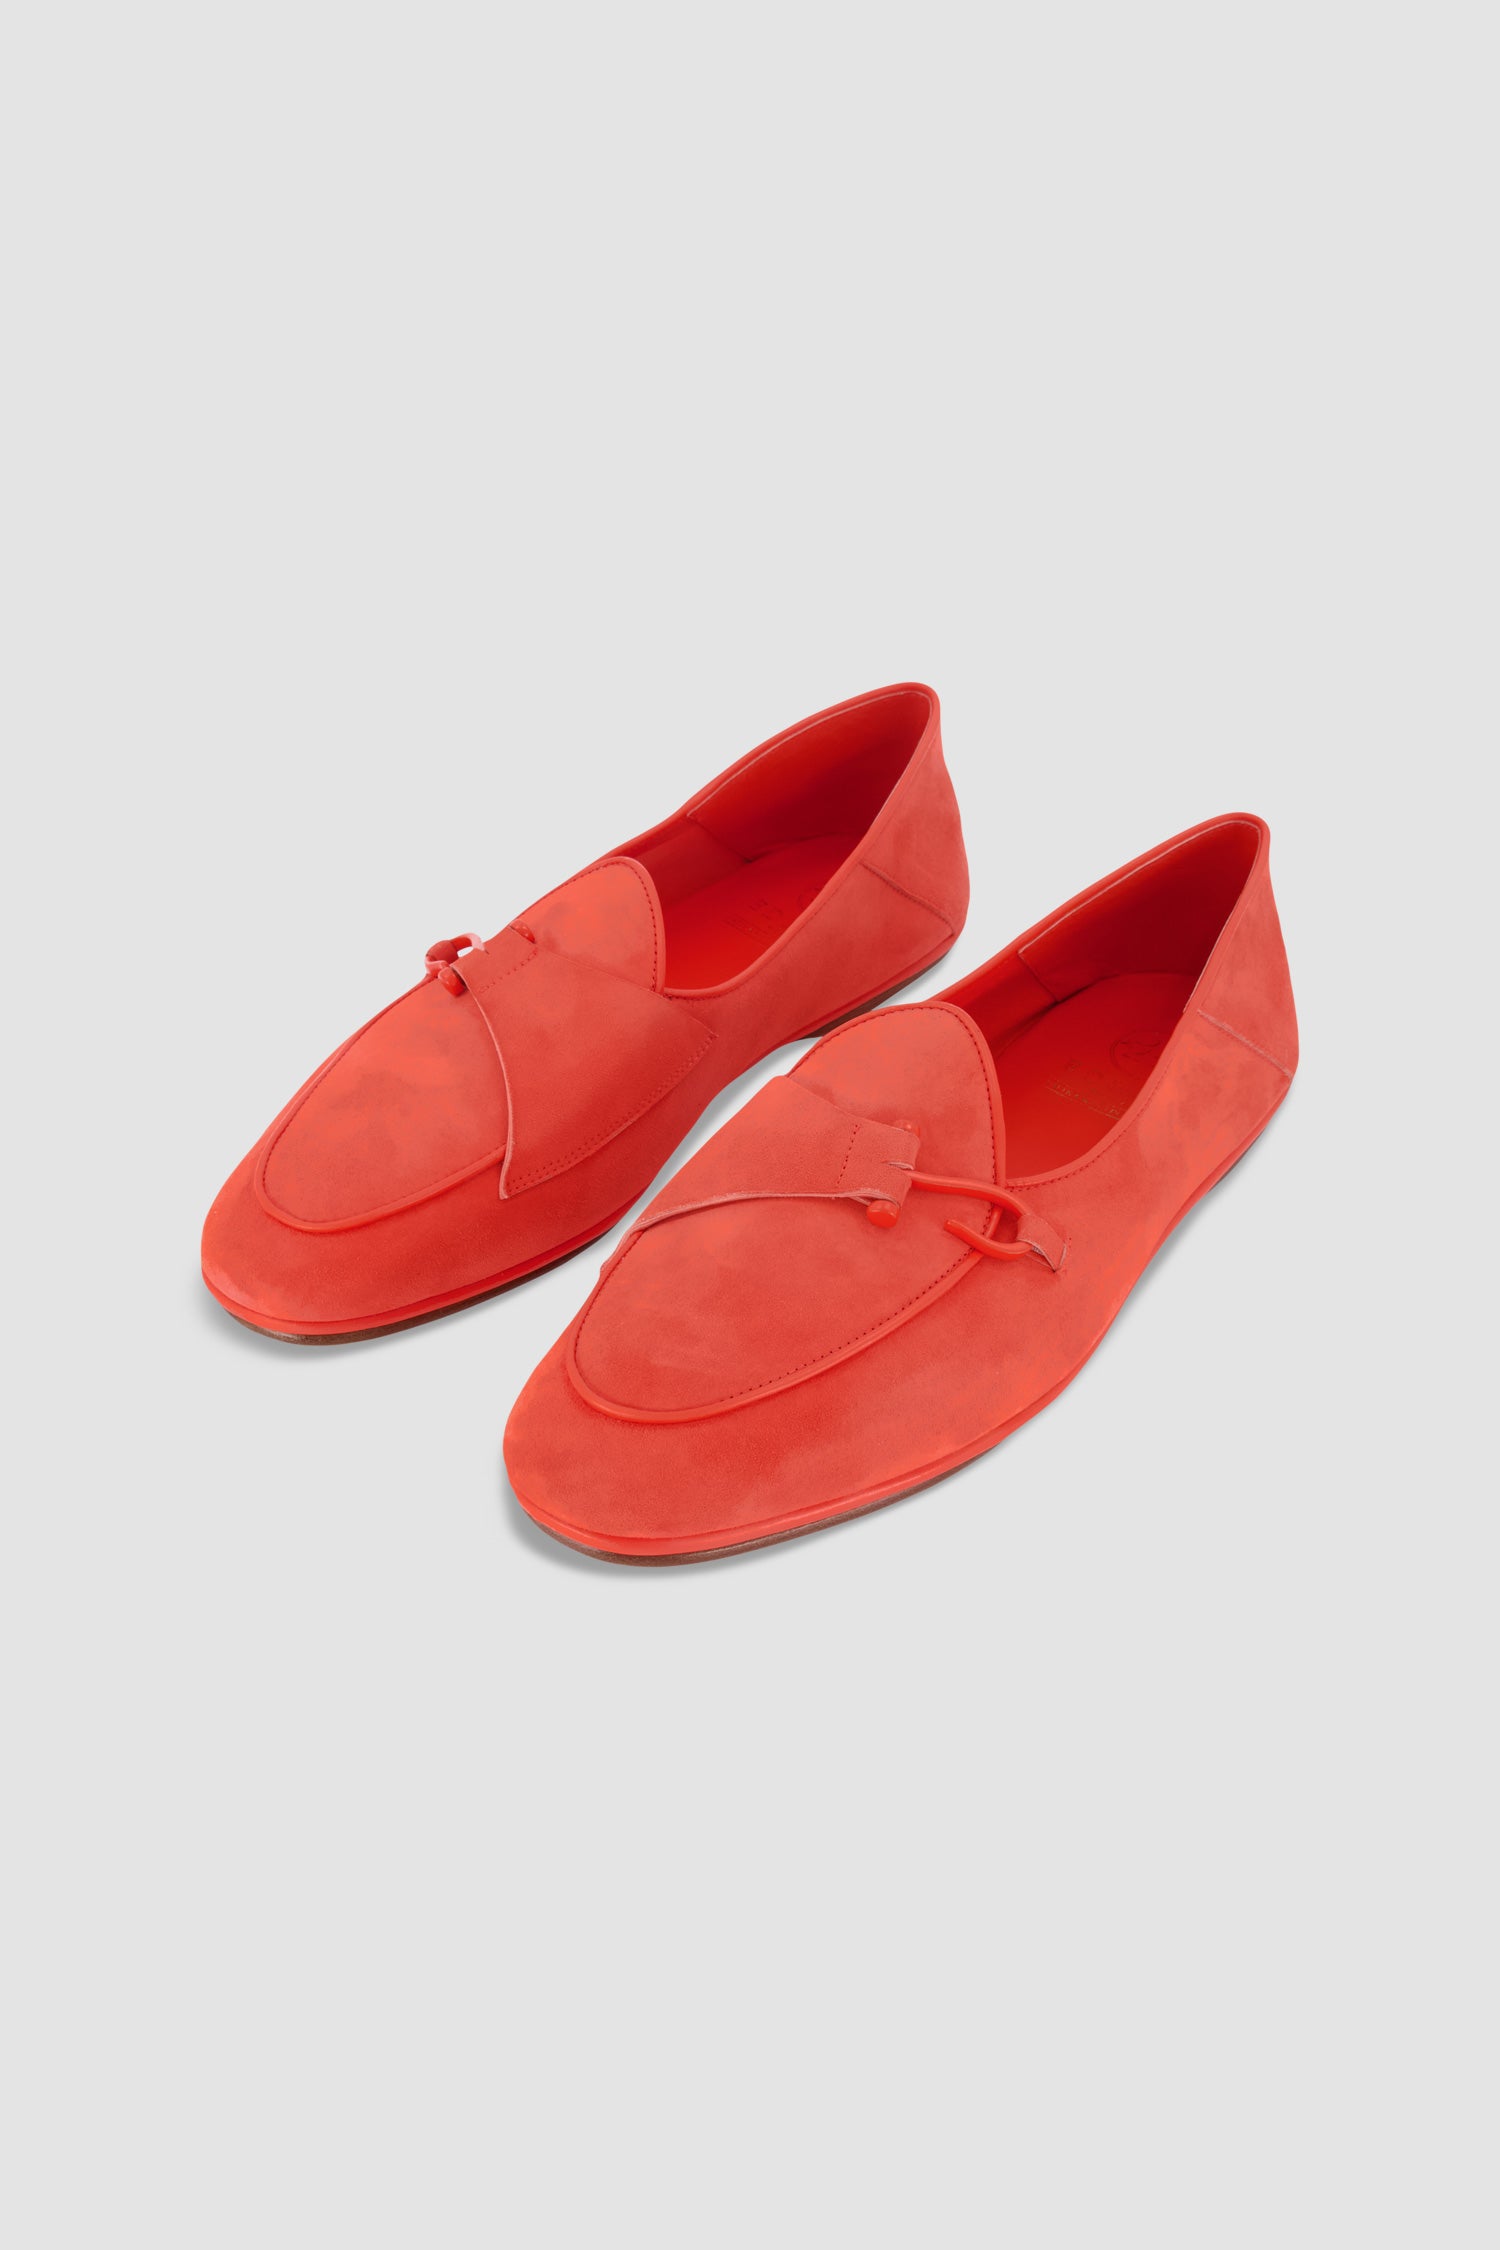 Edhen Milano Comporta Fly Red Suede Loafers